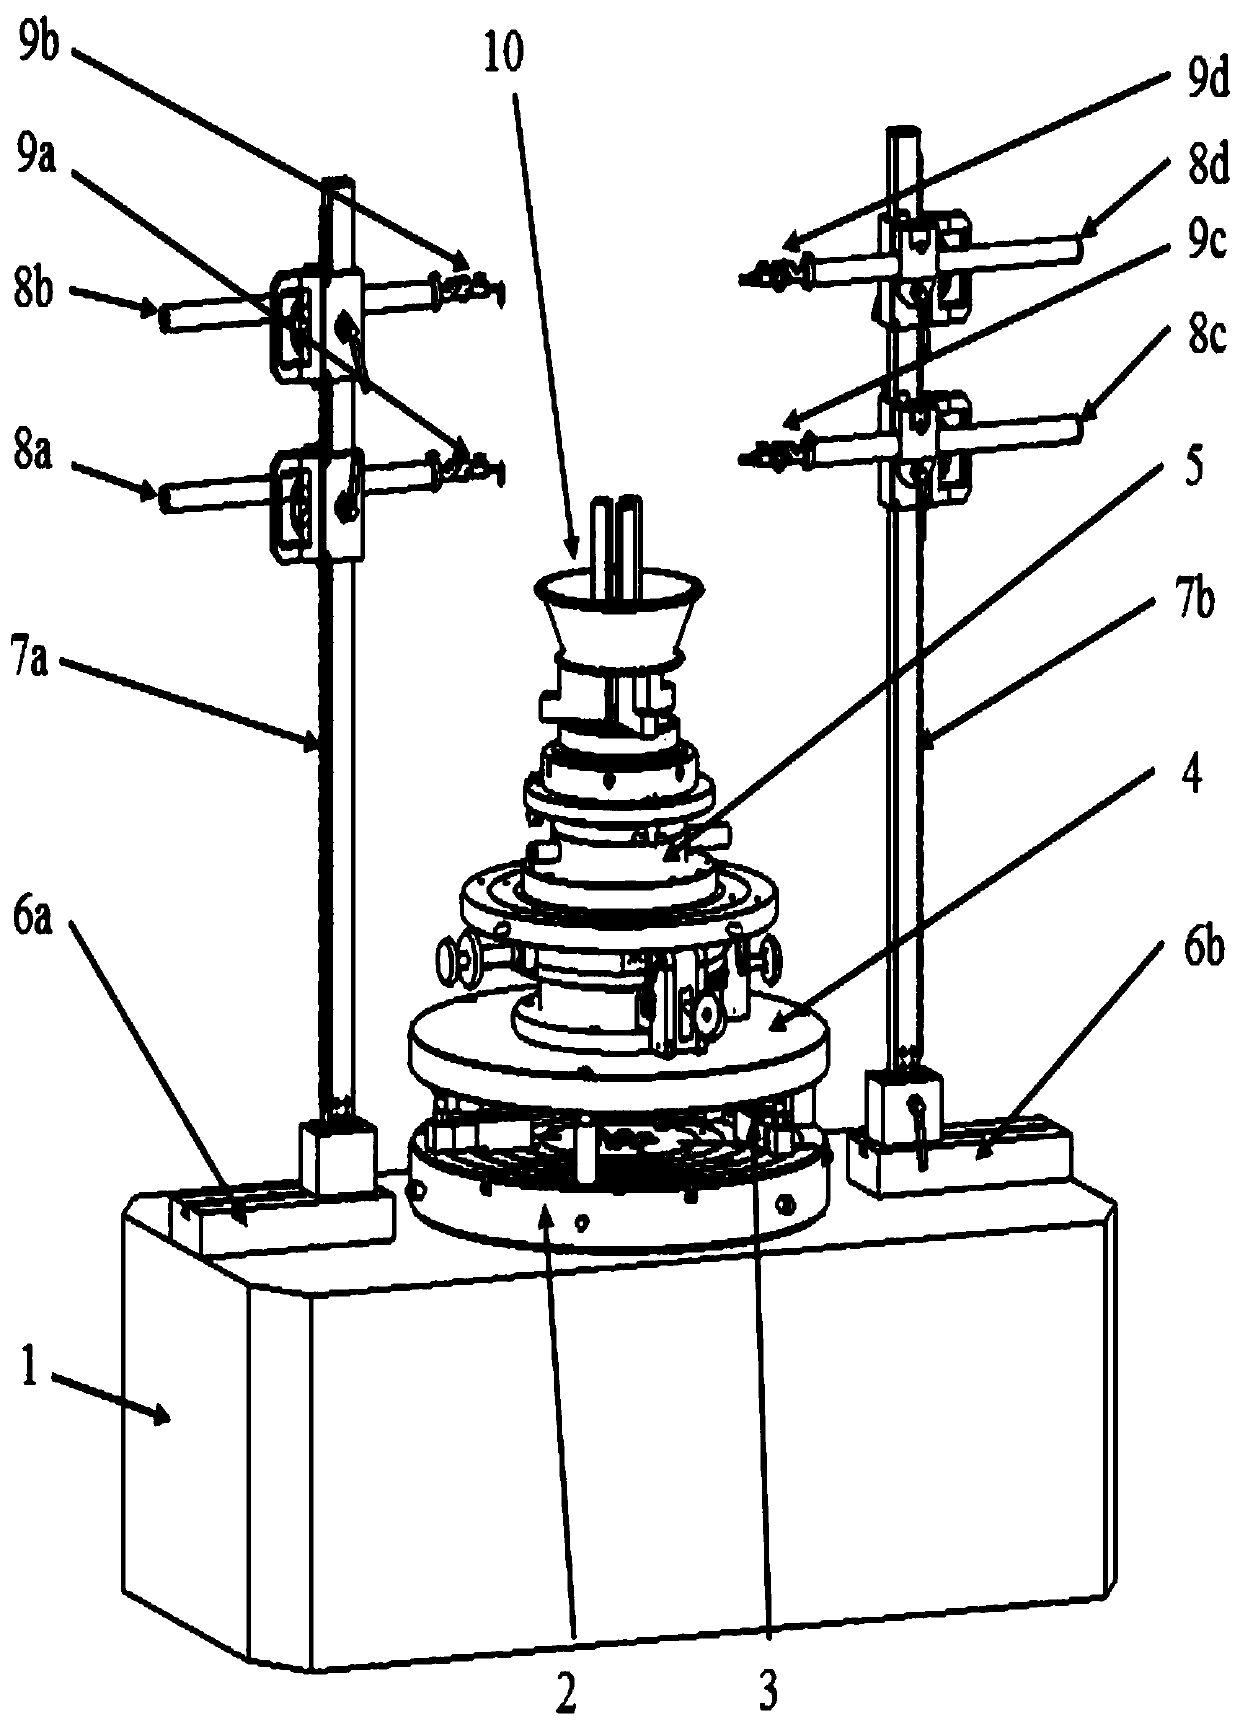 An aeroengine rotor assembly measurement device based on three-point weighing and three-objective optimization method